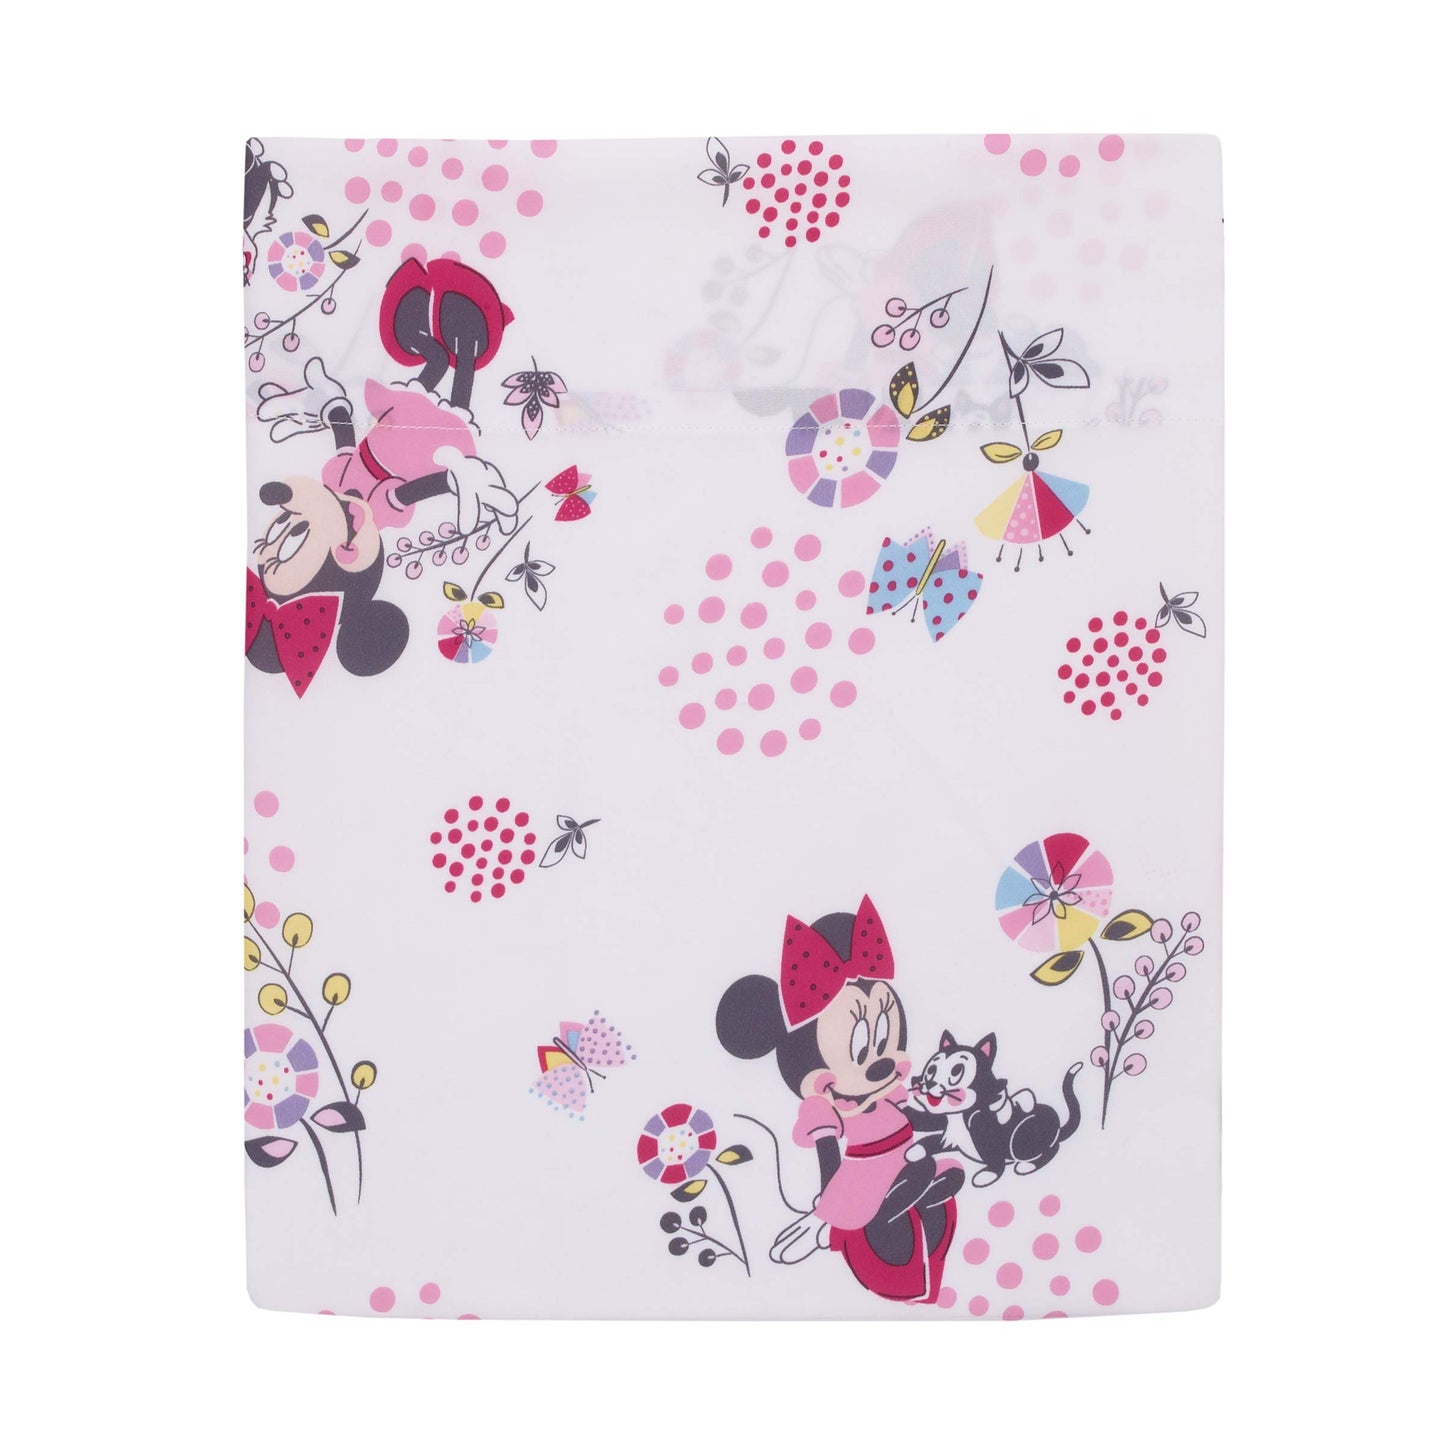 Disney Minnie Mouse - Minnie in Pink 4Piece Toddler Bed Set - Comforter, Reversible Pillowcase, Flat Top Sheet &amp; Fitted Bottom Sheet, Pink, Aqua, White,